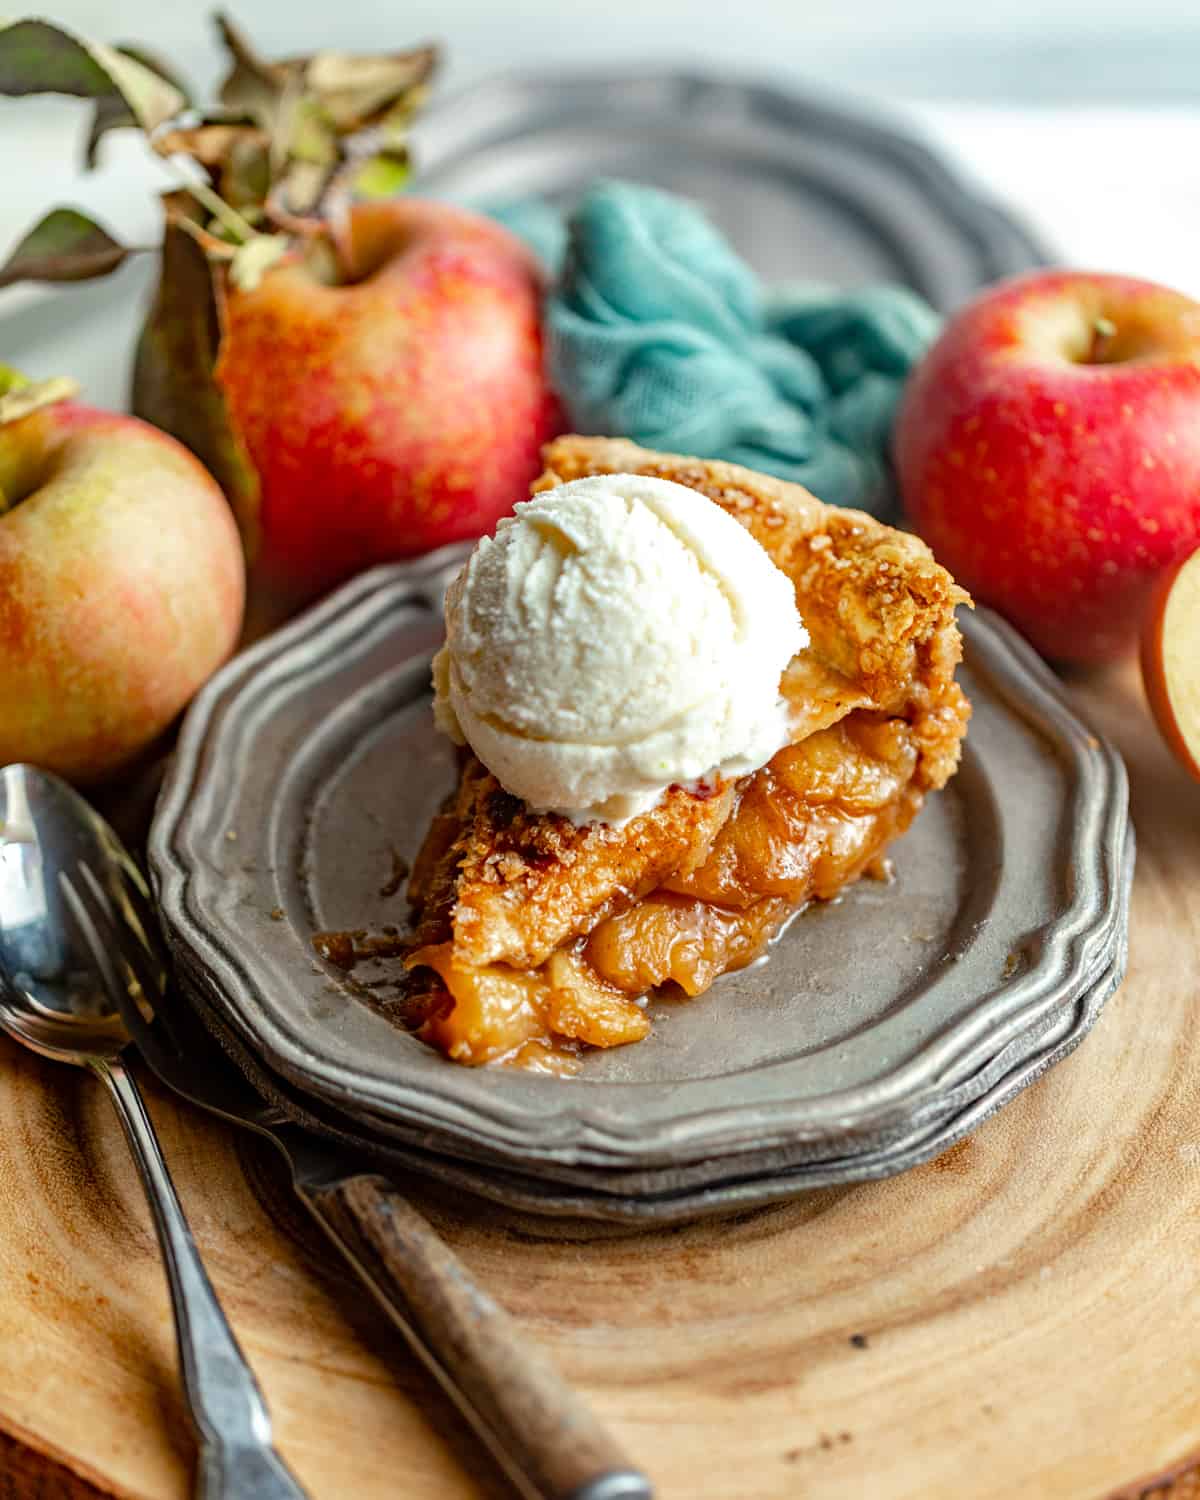 a slice of apple pie on a plate with ice cream.